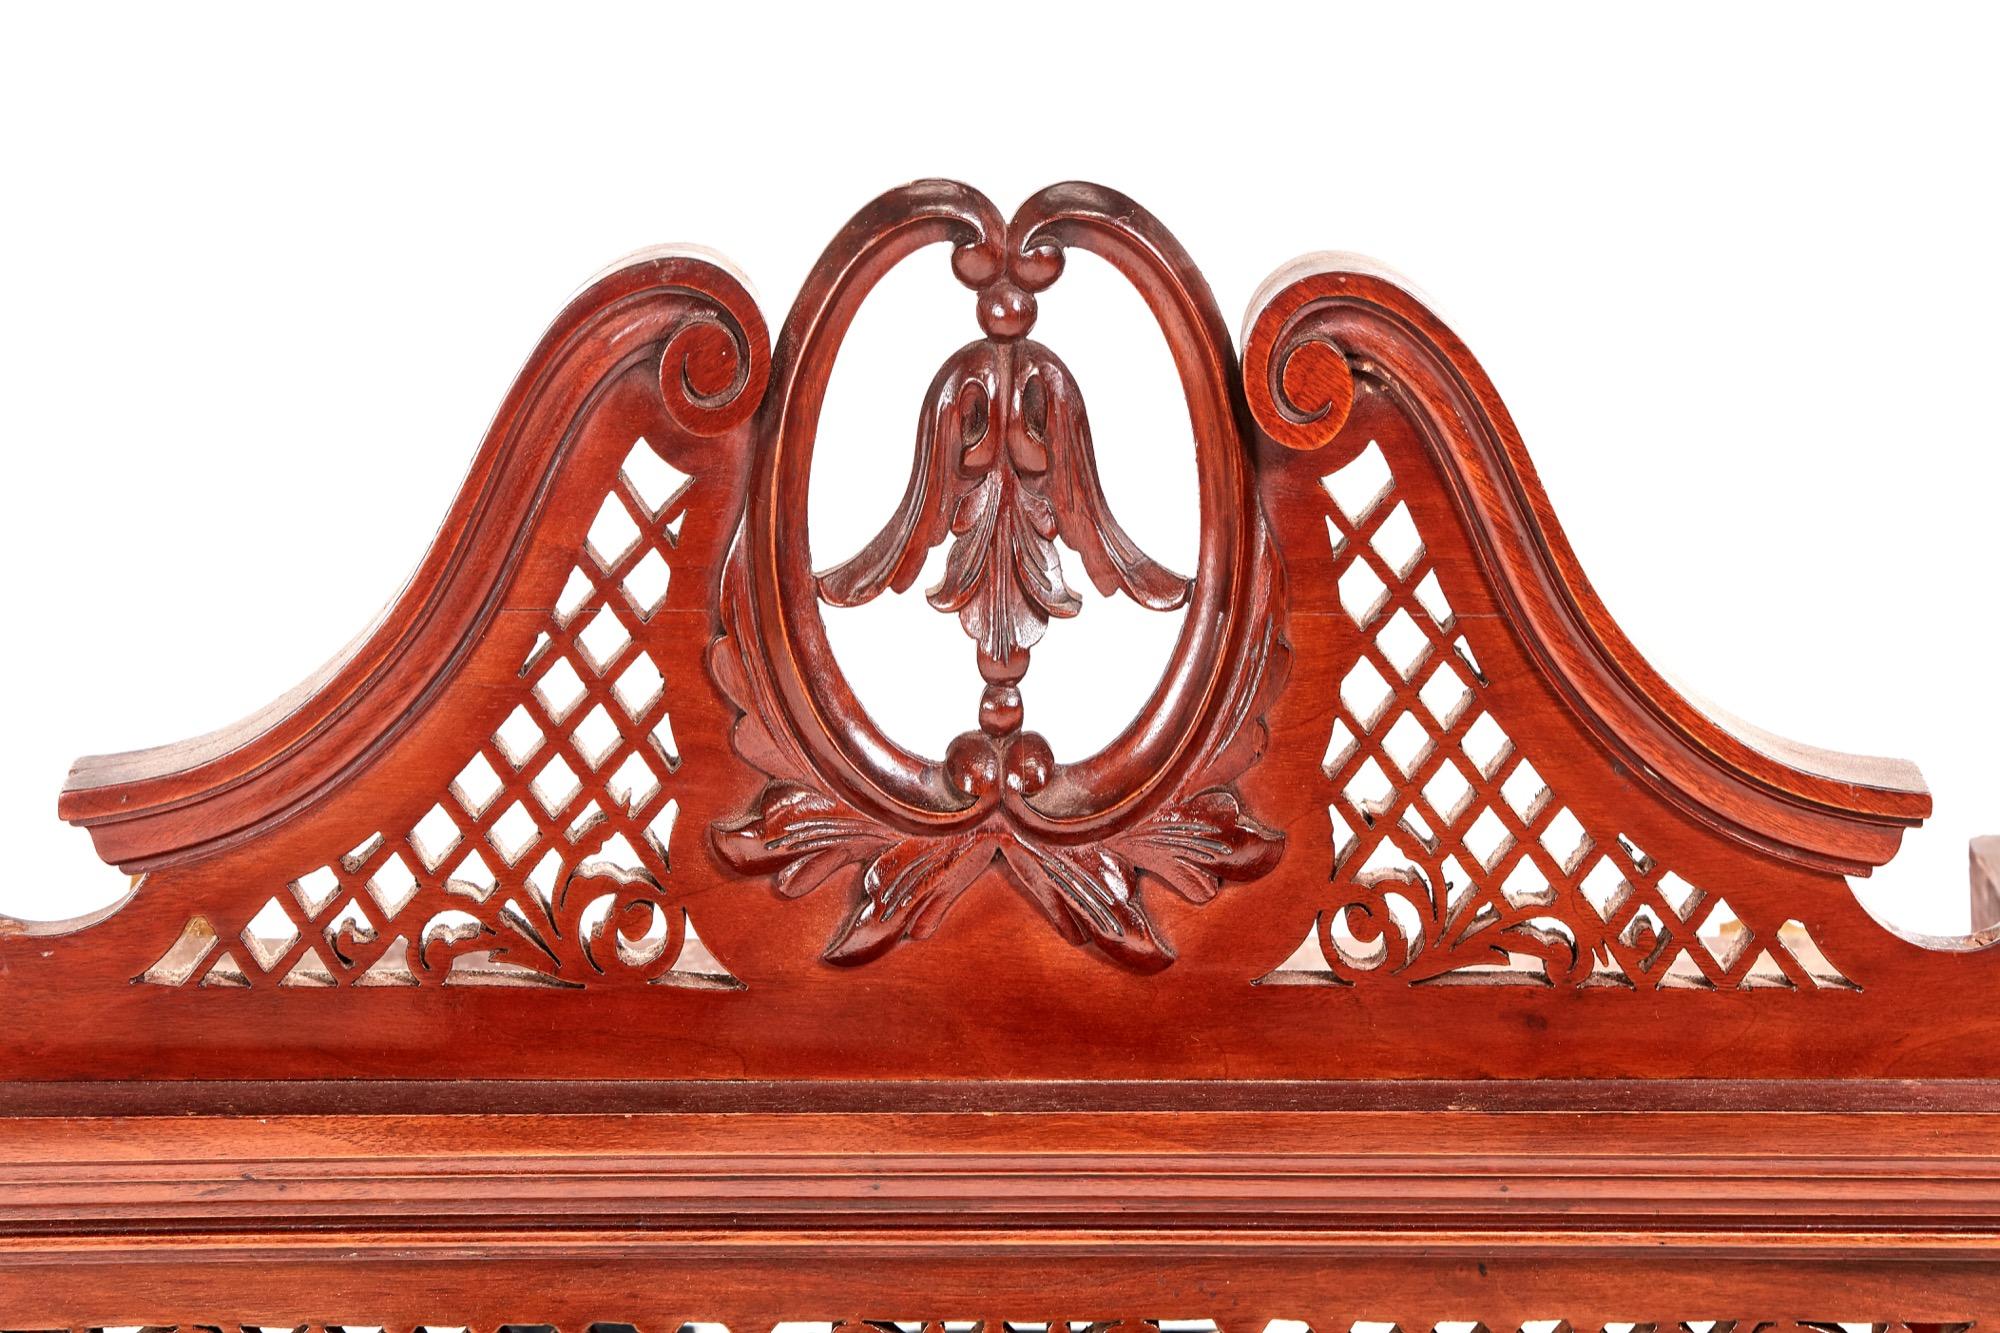 Quality Victorian antique carved mahogany overmantle wall mirror with an outstandingly carved swan-neck pediment, six elegantly shaped bevelled edge mirrors and attractive turned mahogany columns supporting a shaped shelf.

A very attractive piece